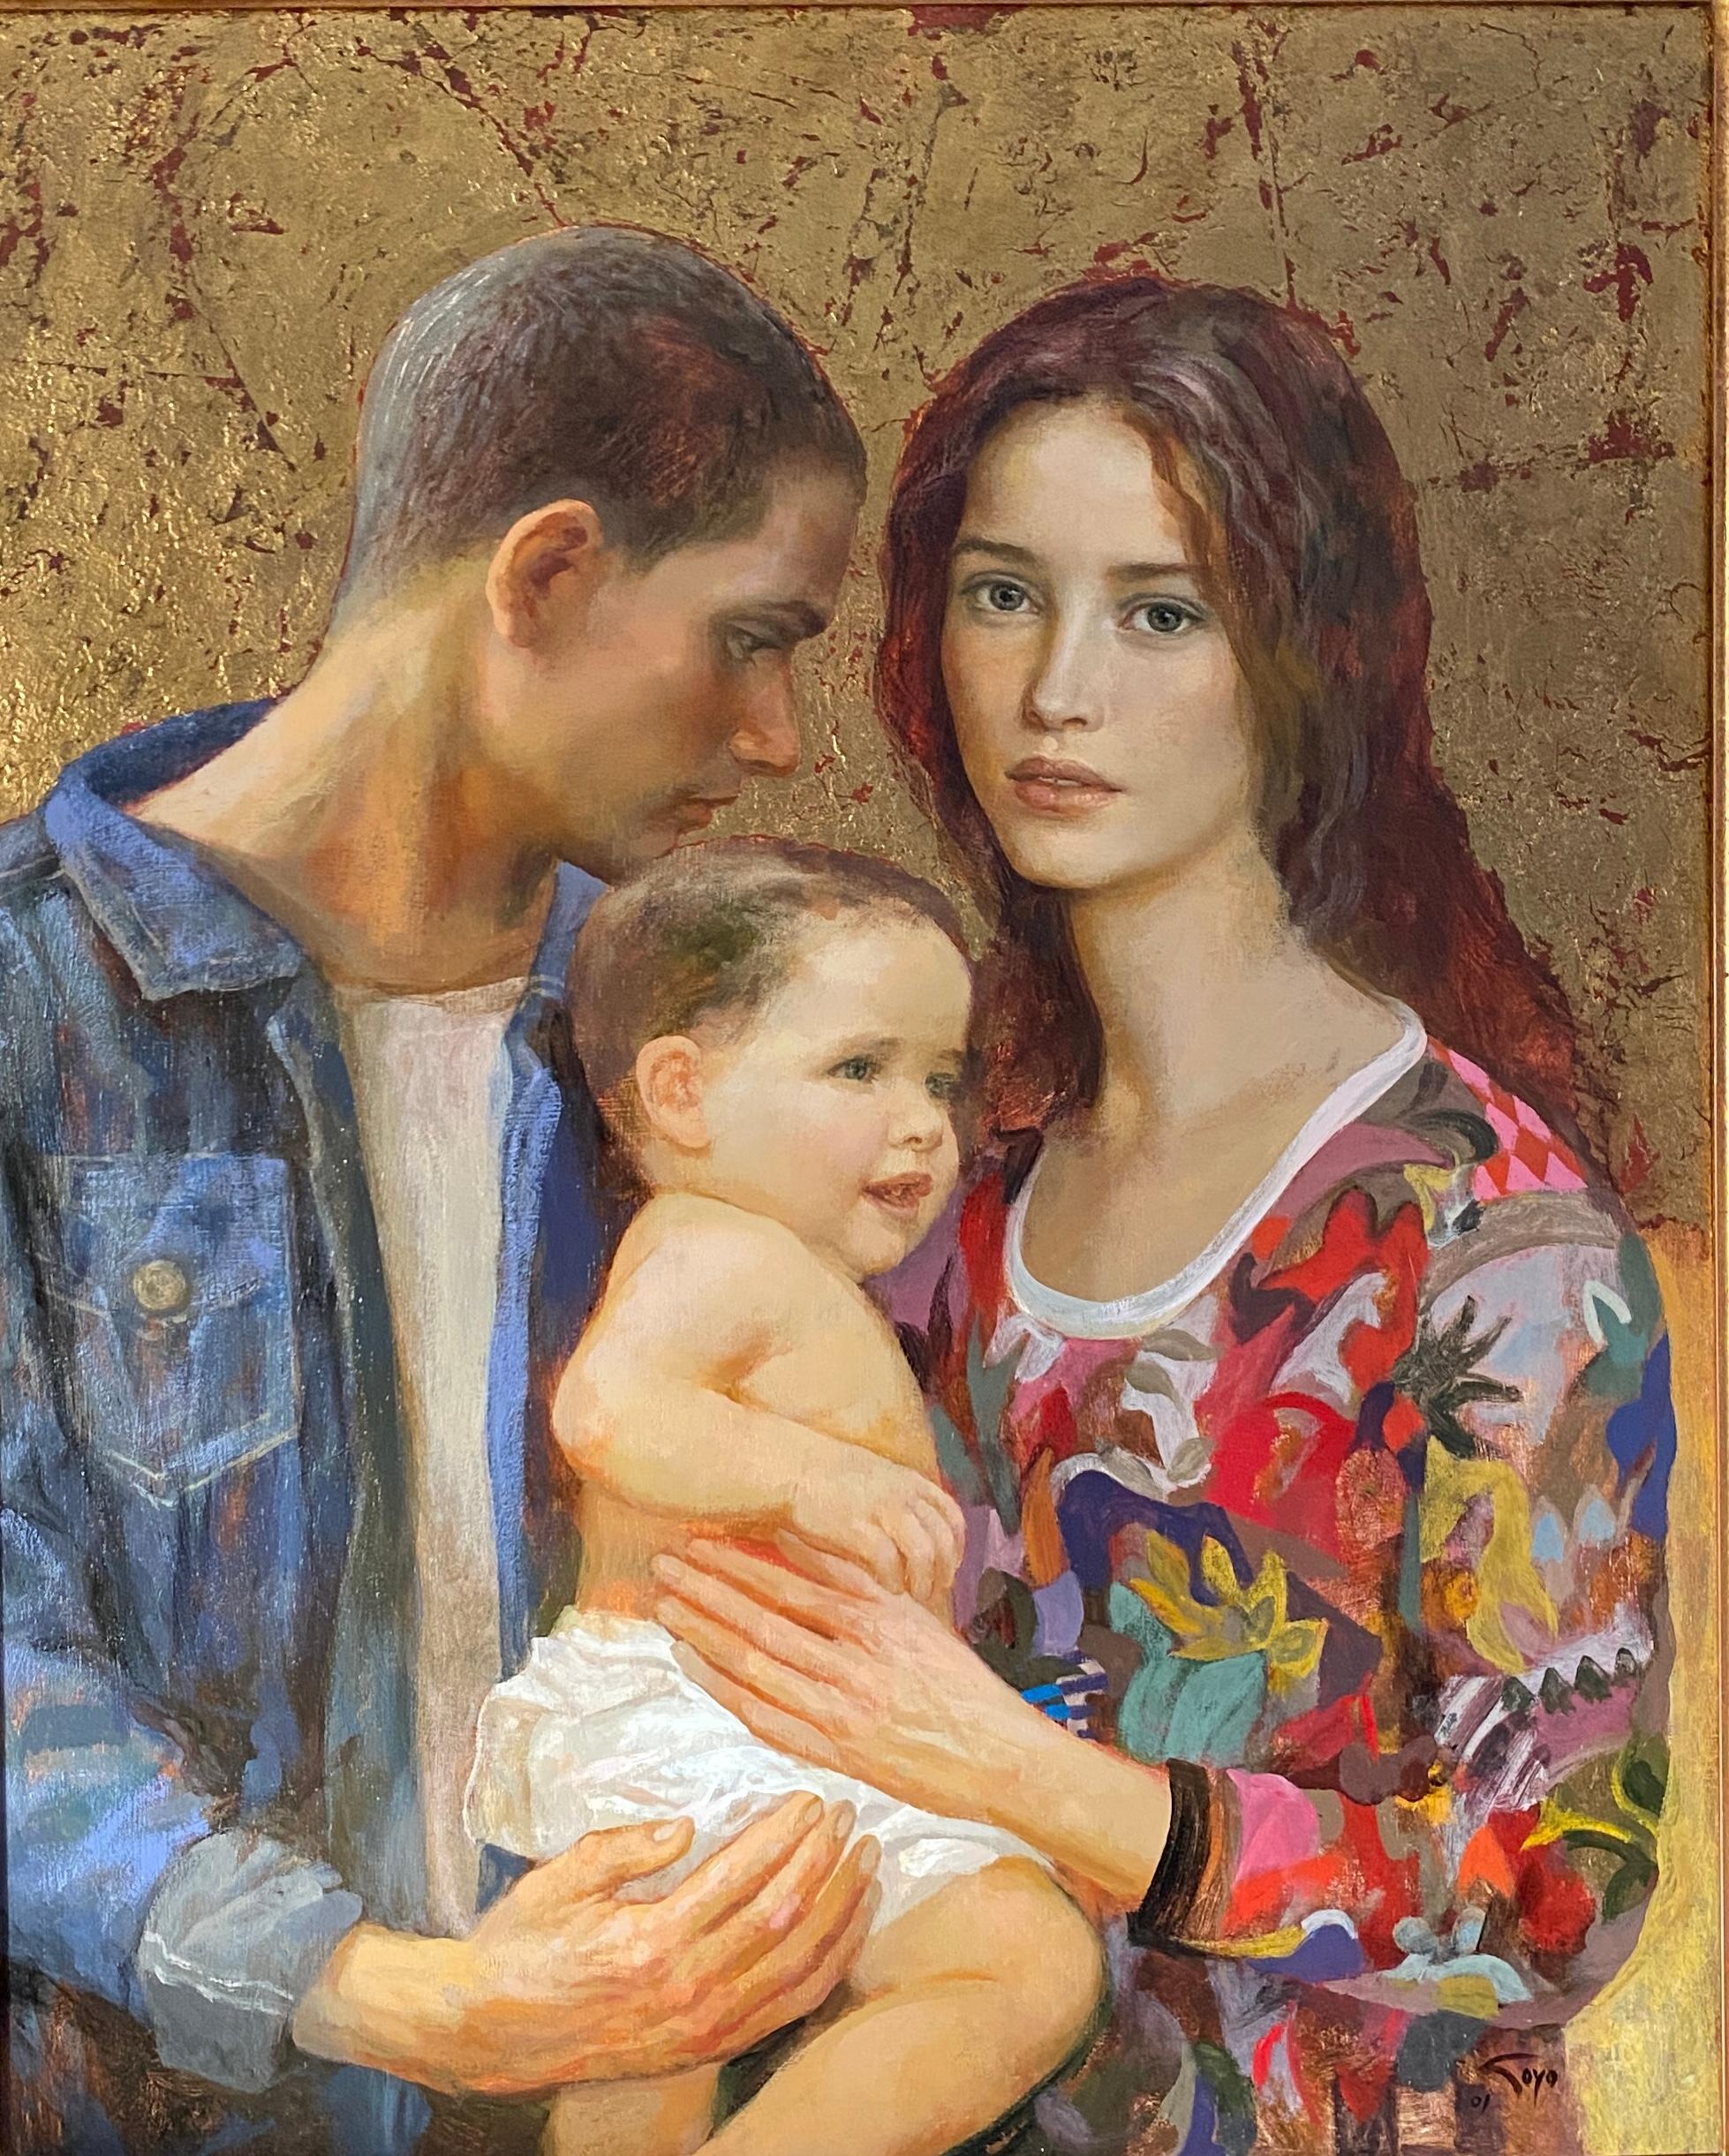 Goyo Dominguez Figurative Painting - "Navidad".  Figurative painting inspired in Christmas and a modern Holy Family